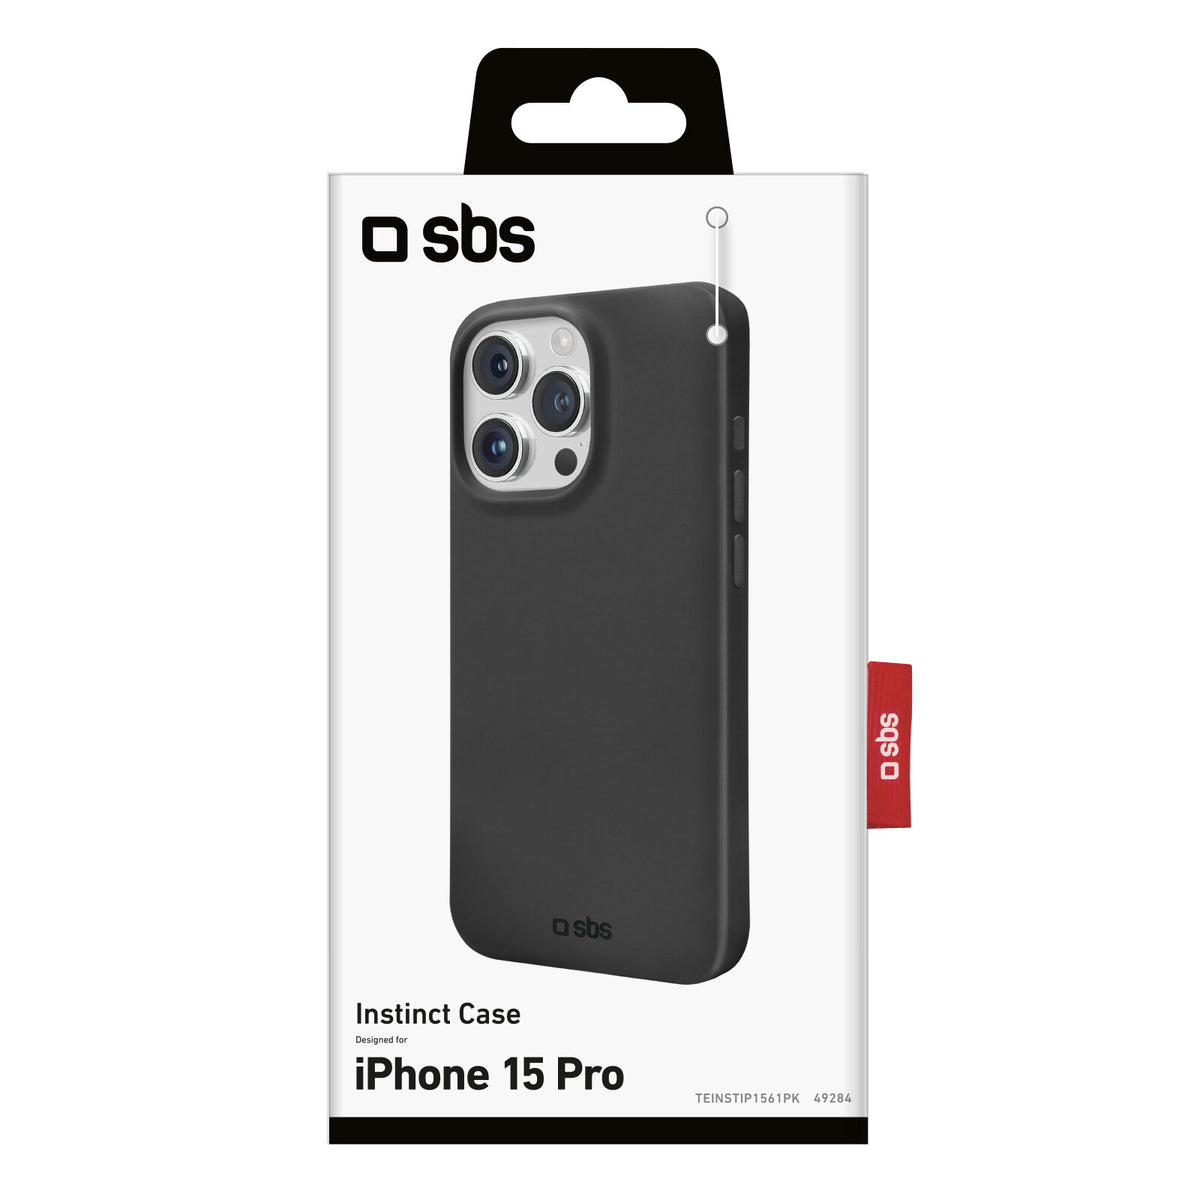 SBS Instinct mobile phone case for iPhone 15 Pro in Black